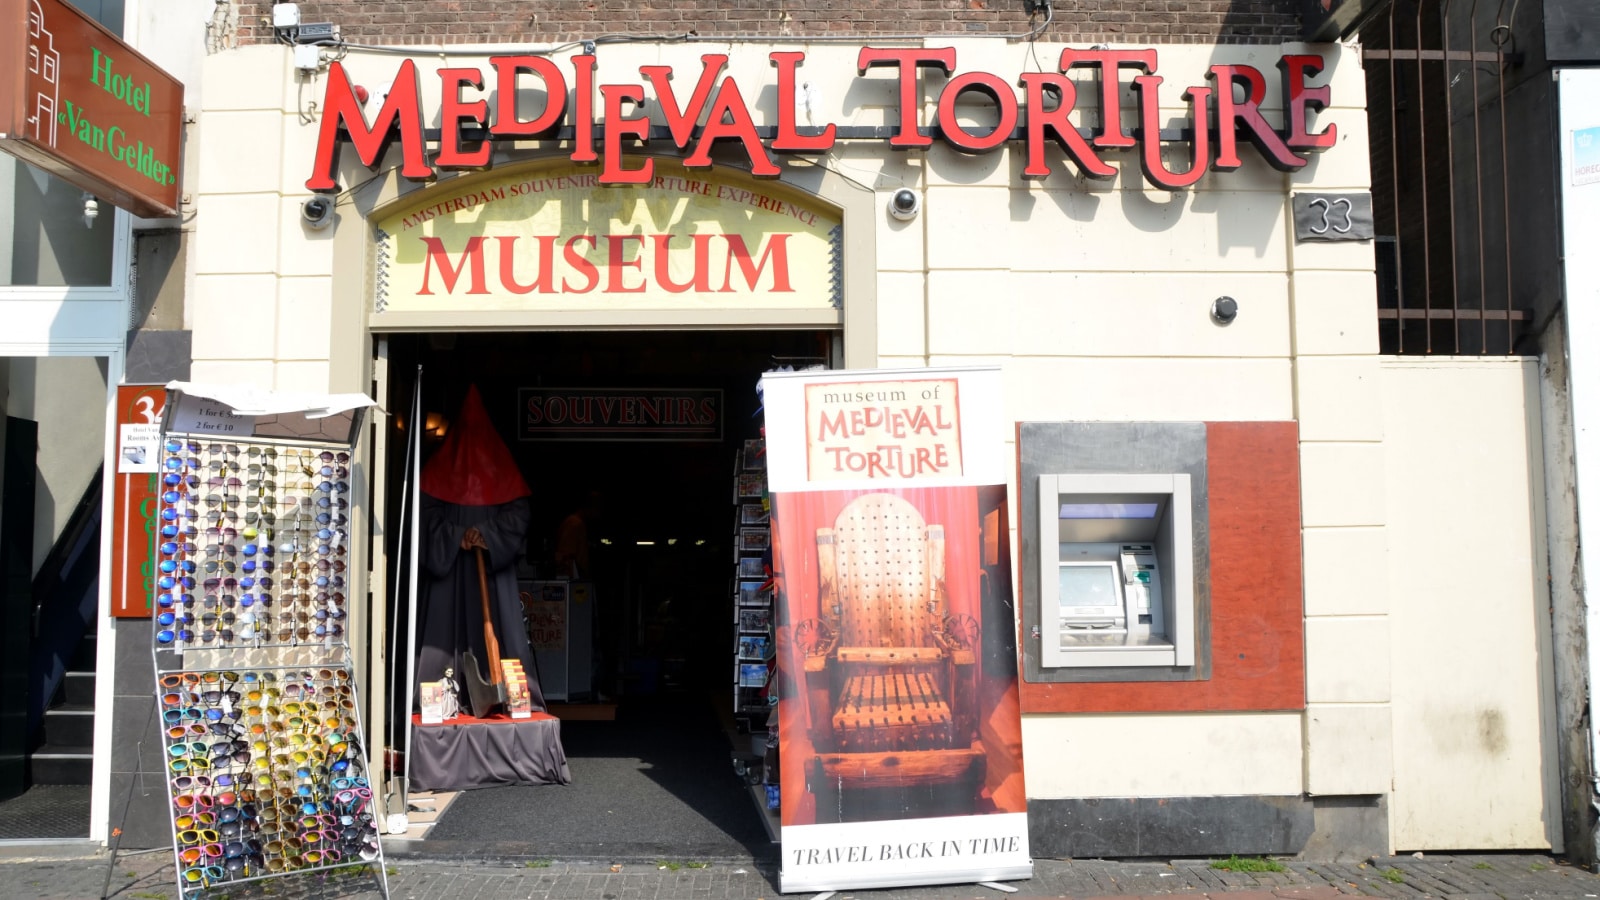 AMSTERDAM, NETHERLANDS - JULY 26, 2014: Medieval torture museum in Amsterdam, Holland